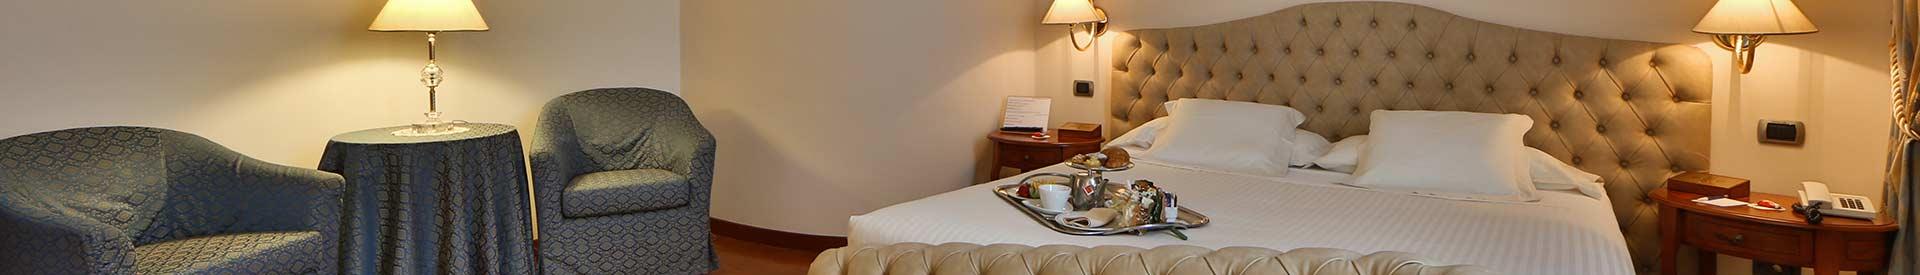  Looking for a hotel for your stay in Forlì (FC)? Book/reserve at the Best Western Hotel Globus City